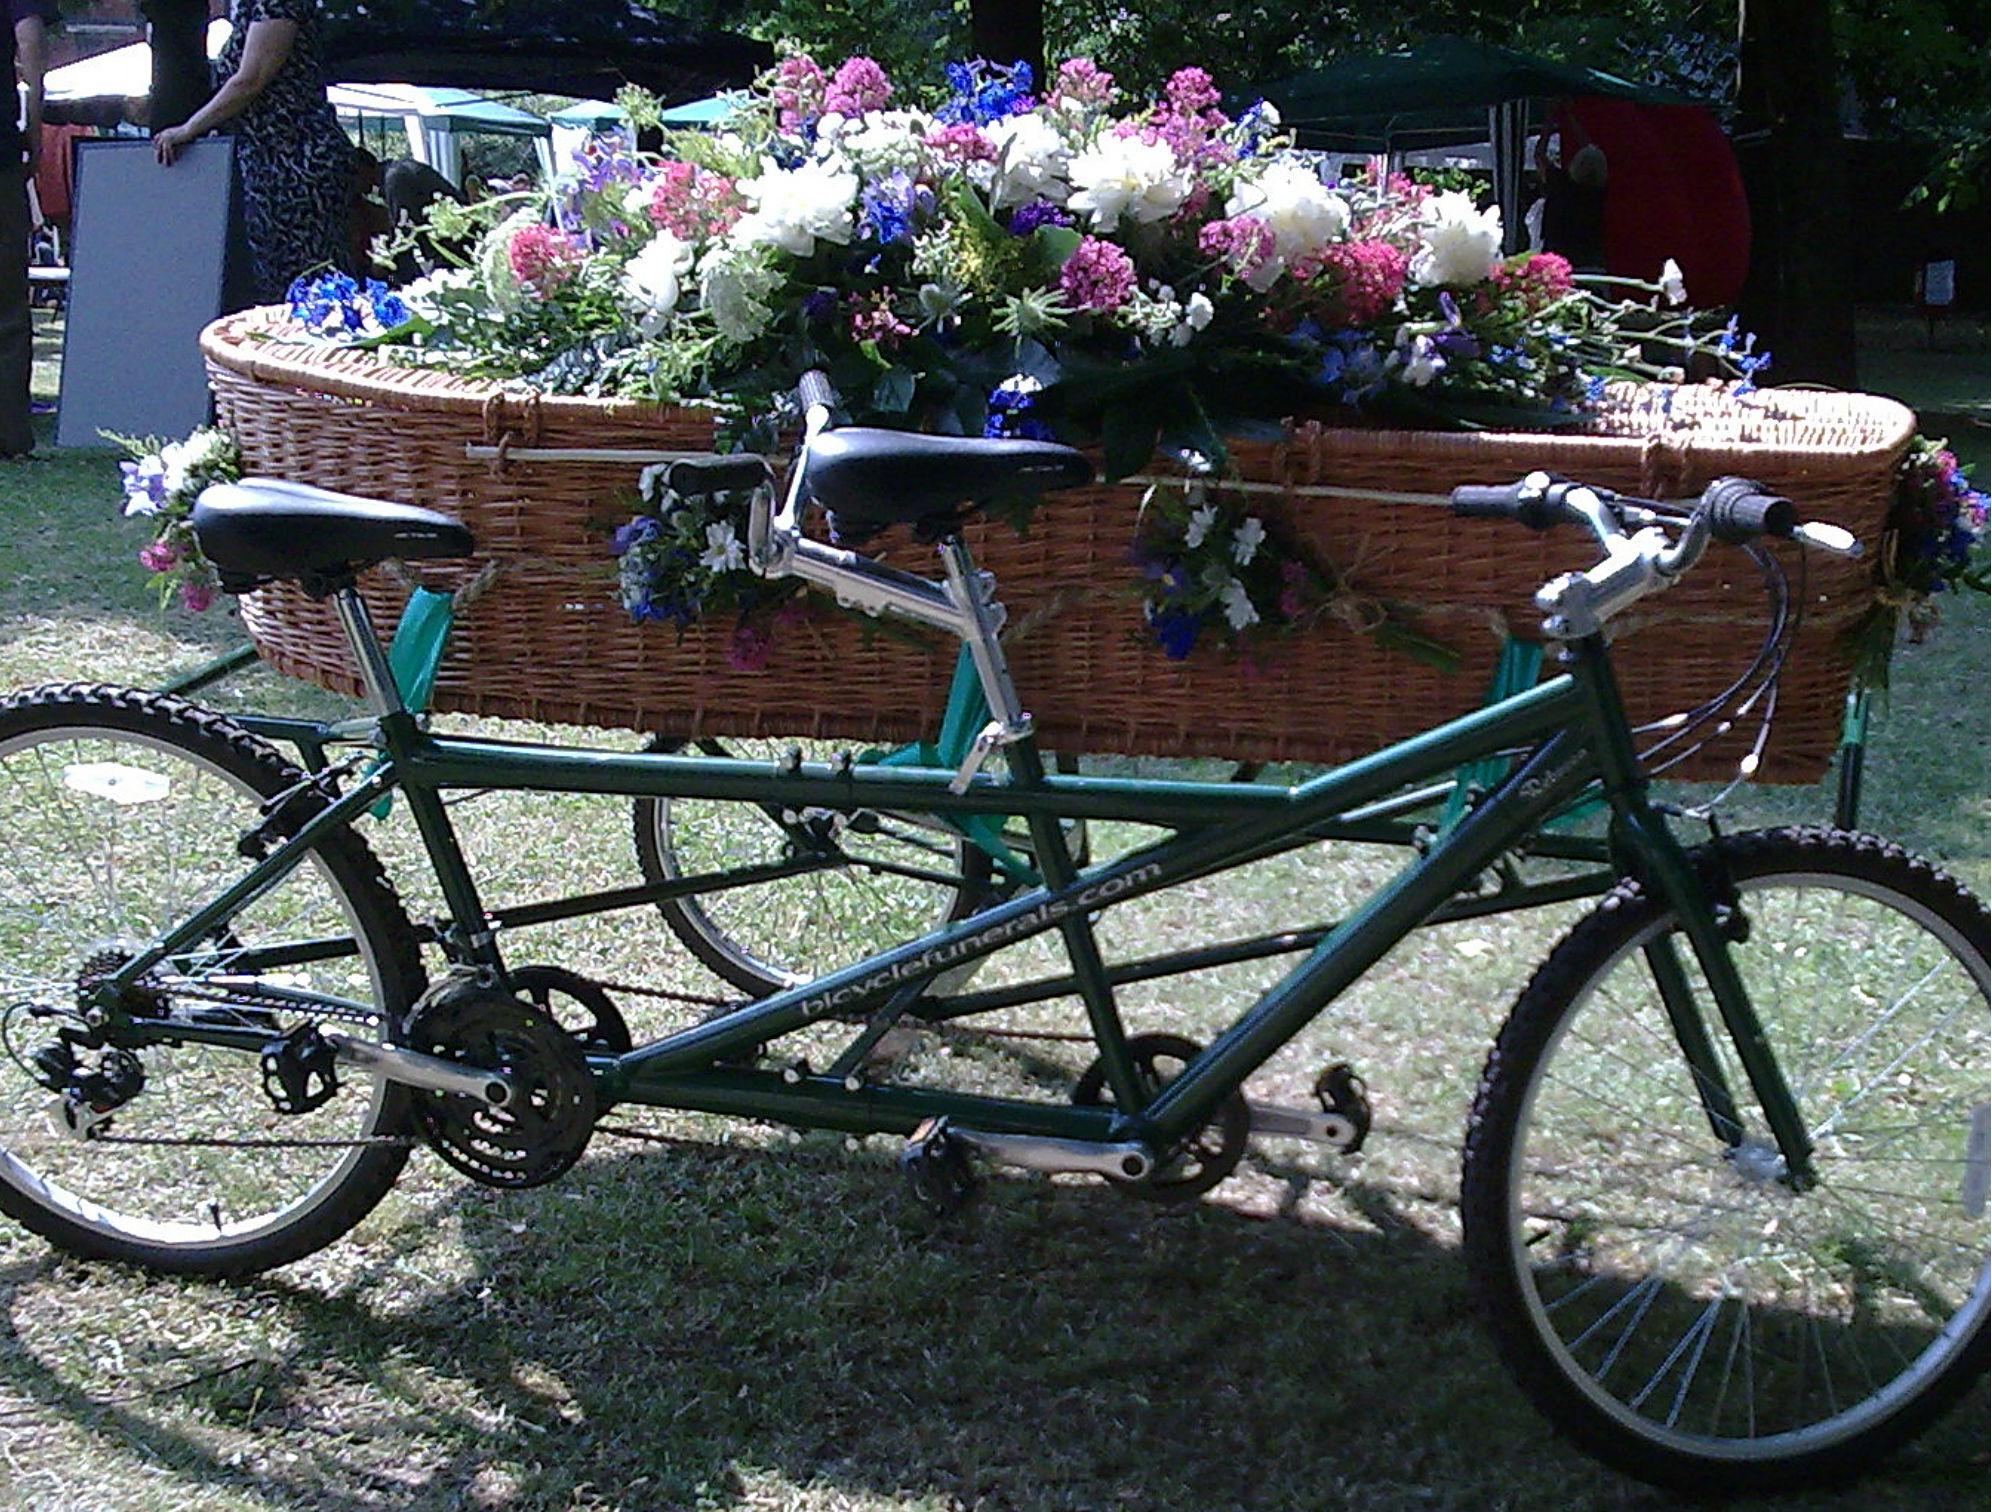 The UK's only tandem hearse is one such alternative idea being adopted to mark the life of a loved one